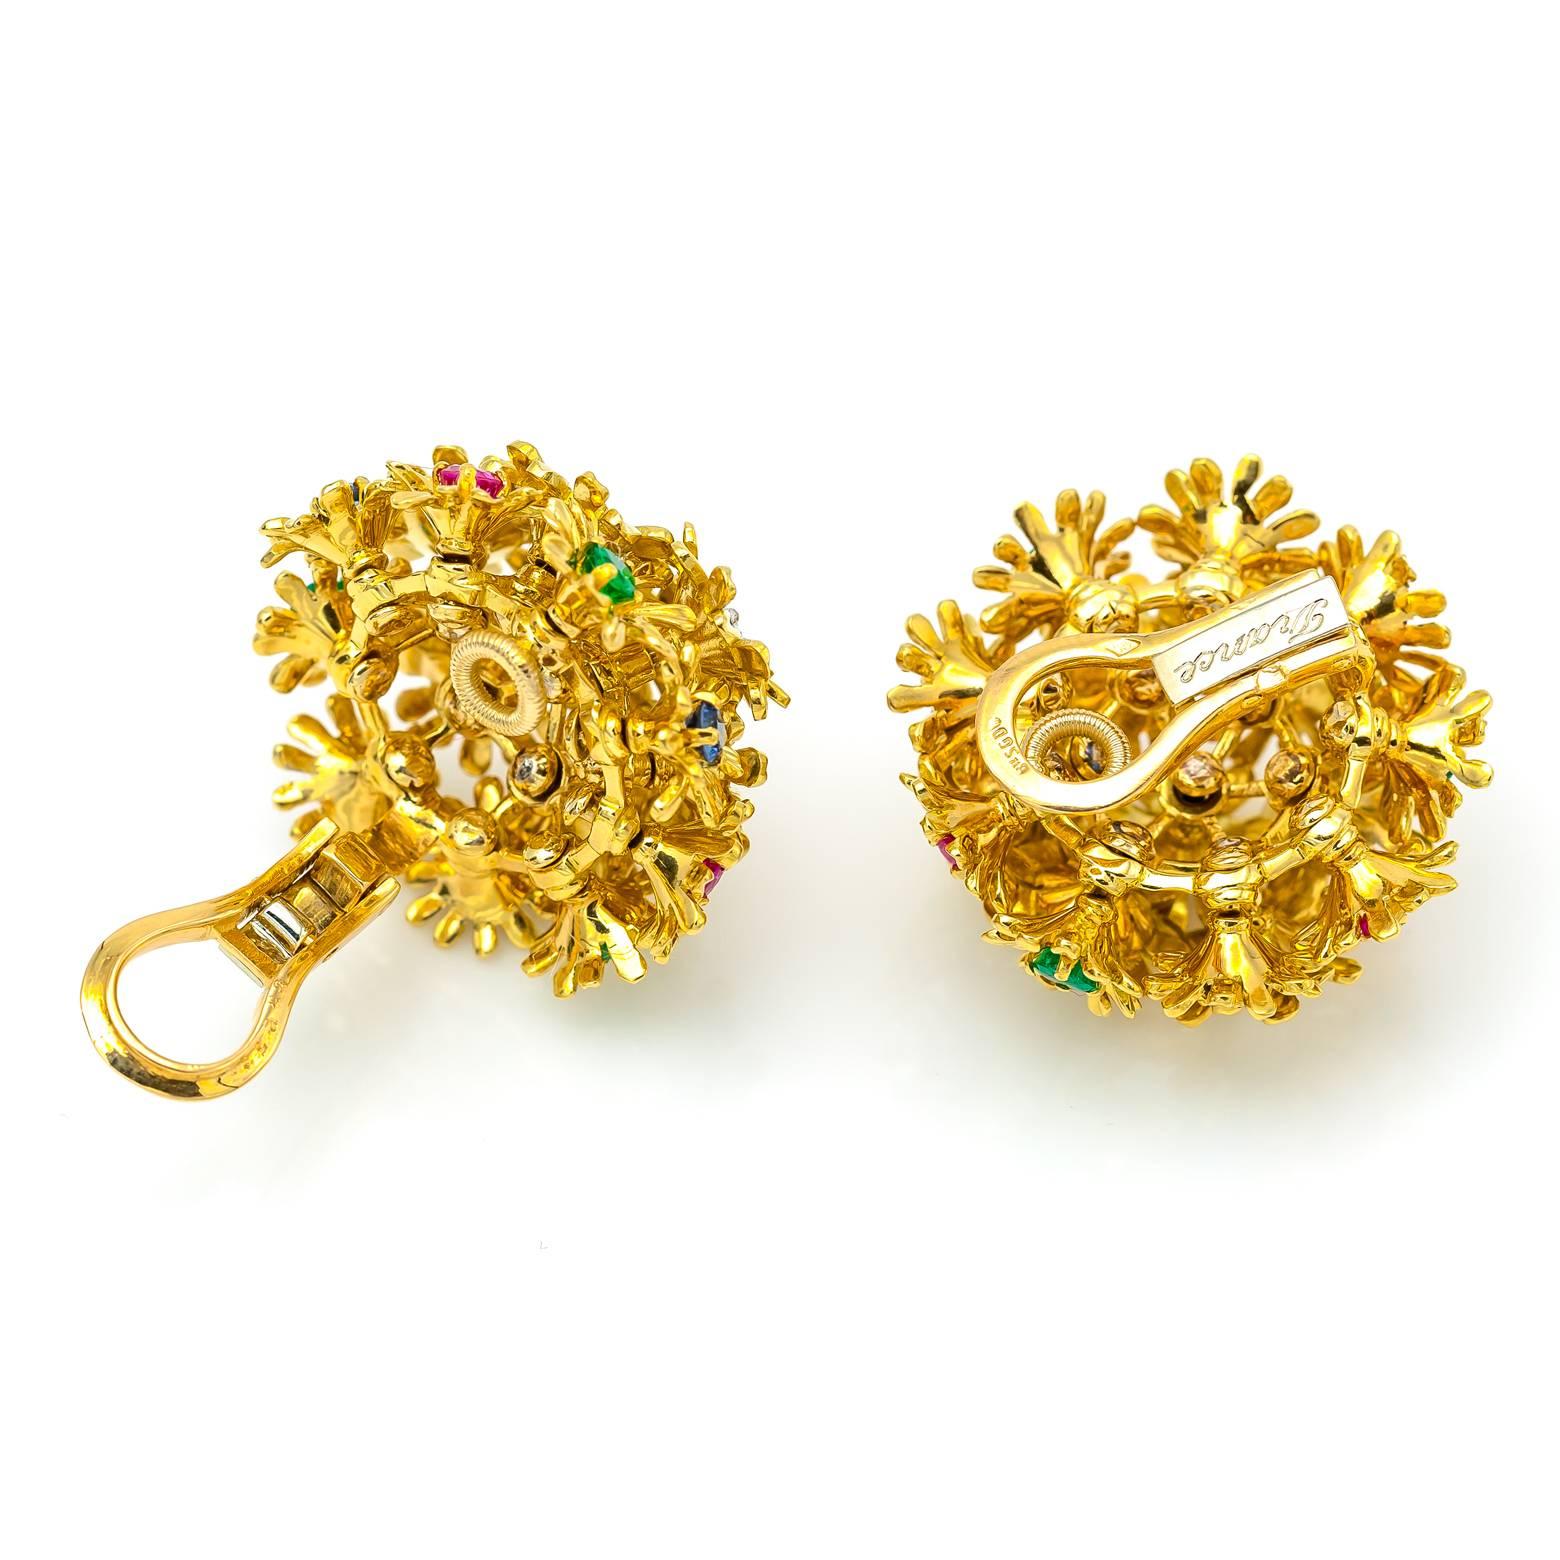 Women's Tremblant Yellow Gold Earrings Flower with Diamonds Rubies Emeralds Sapphire